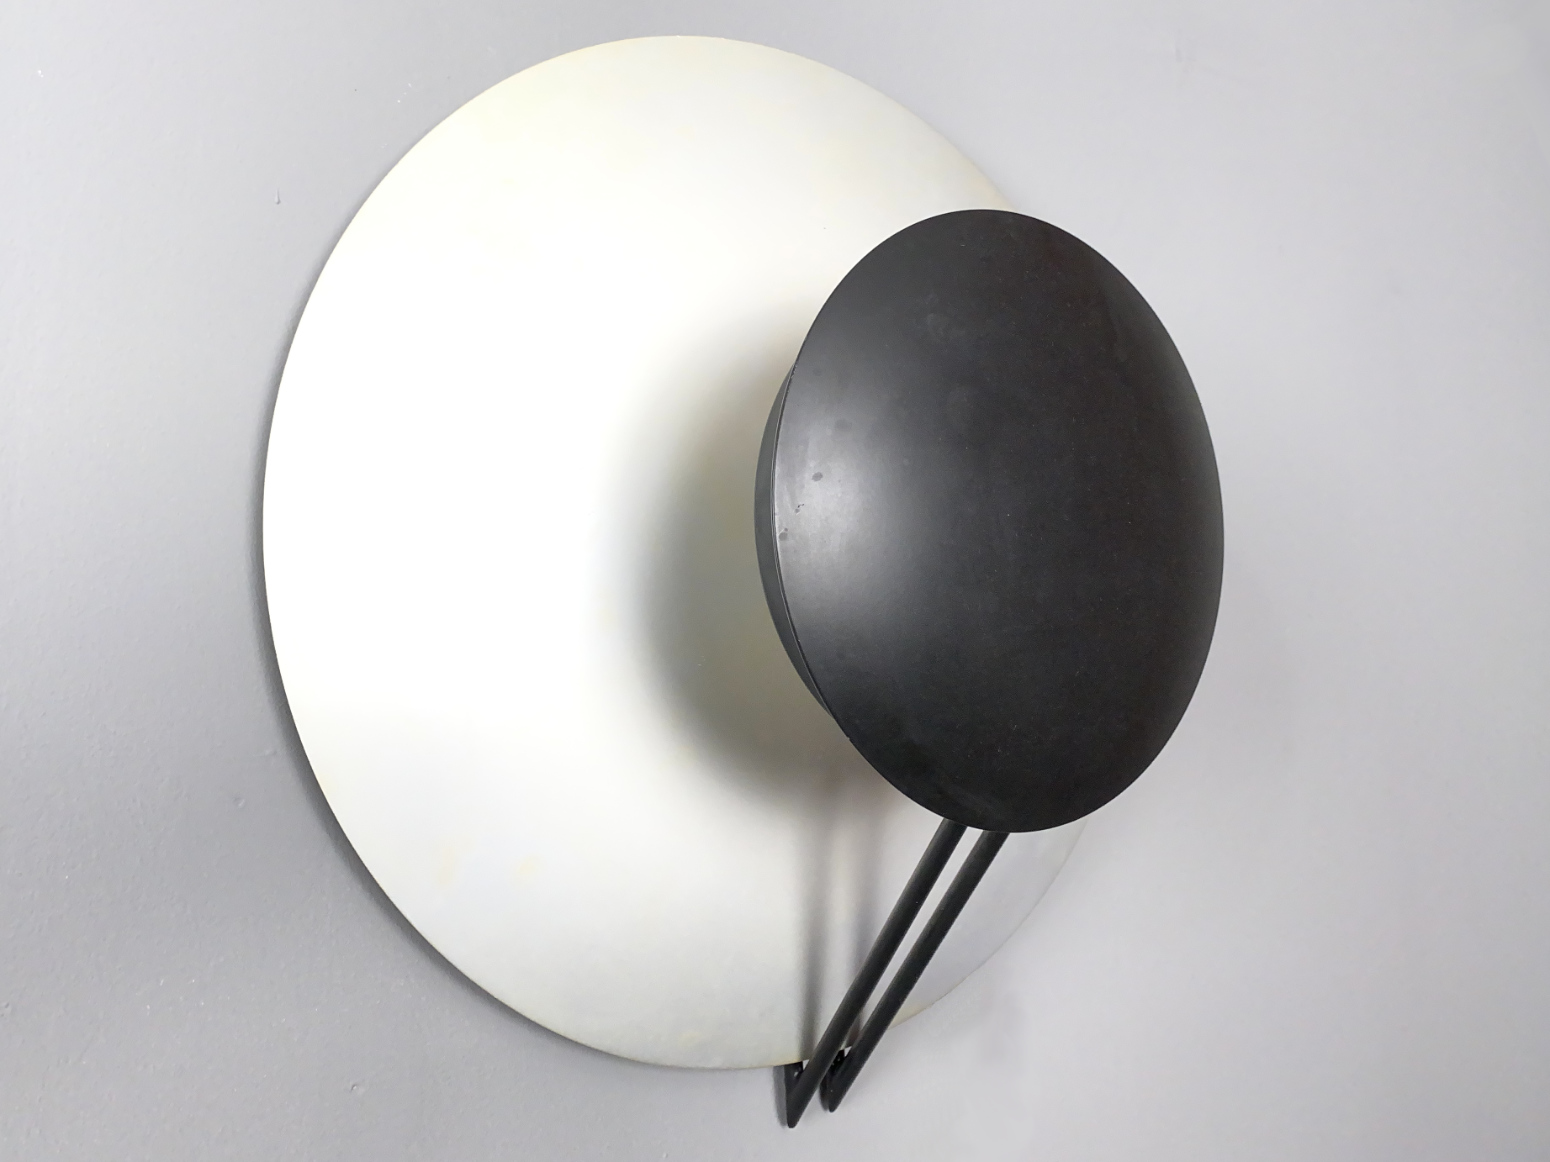 “SOLD” Vega Sconce/Wall Lamp by Luciano Cesaro & Fabio Amico for Tre Ci Luce, Italy, 1980s